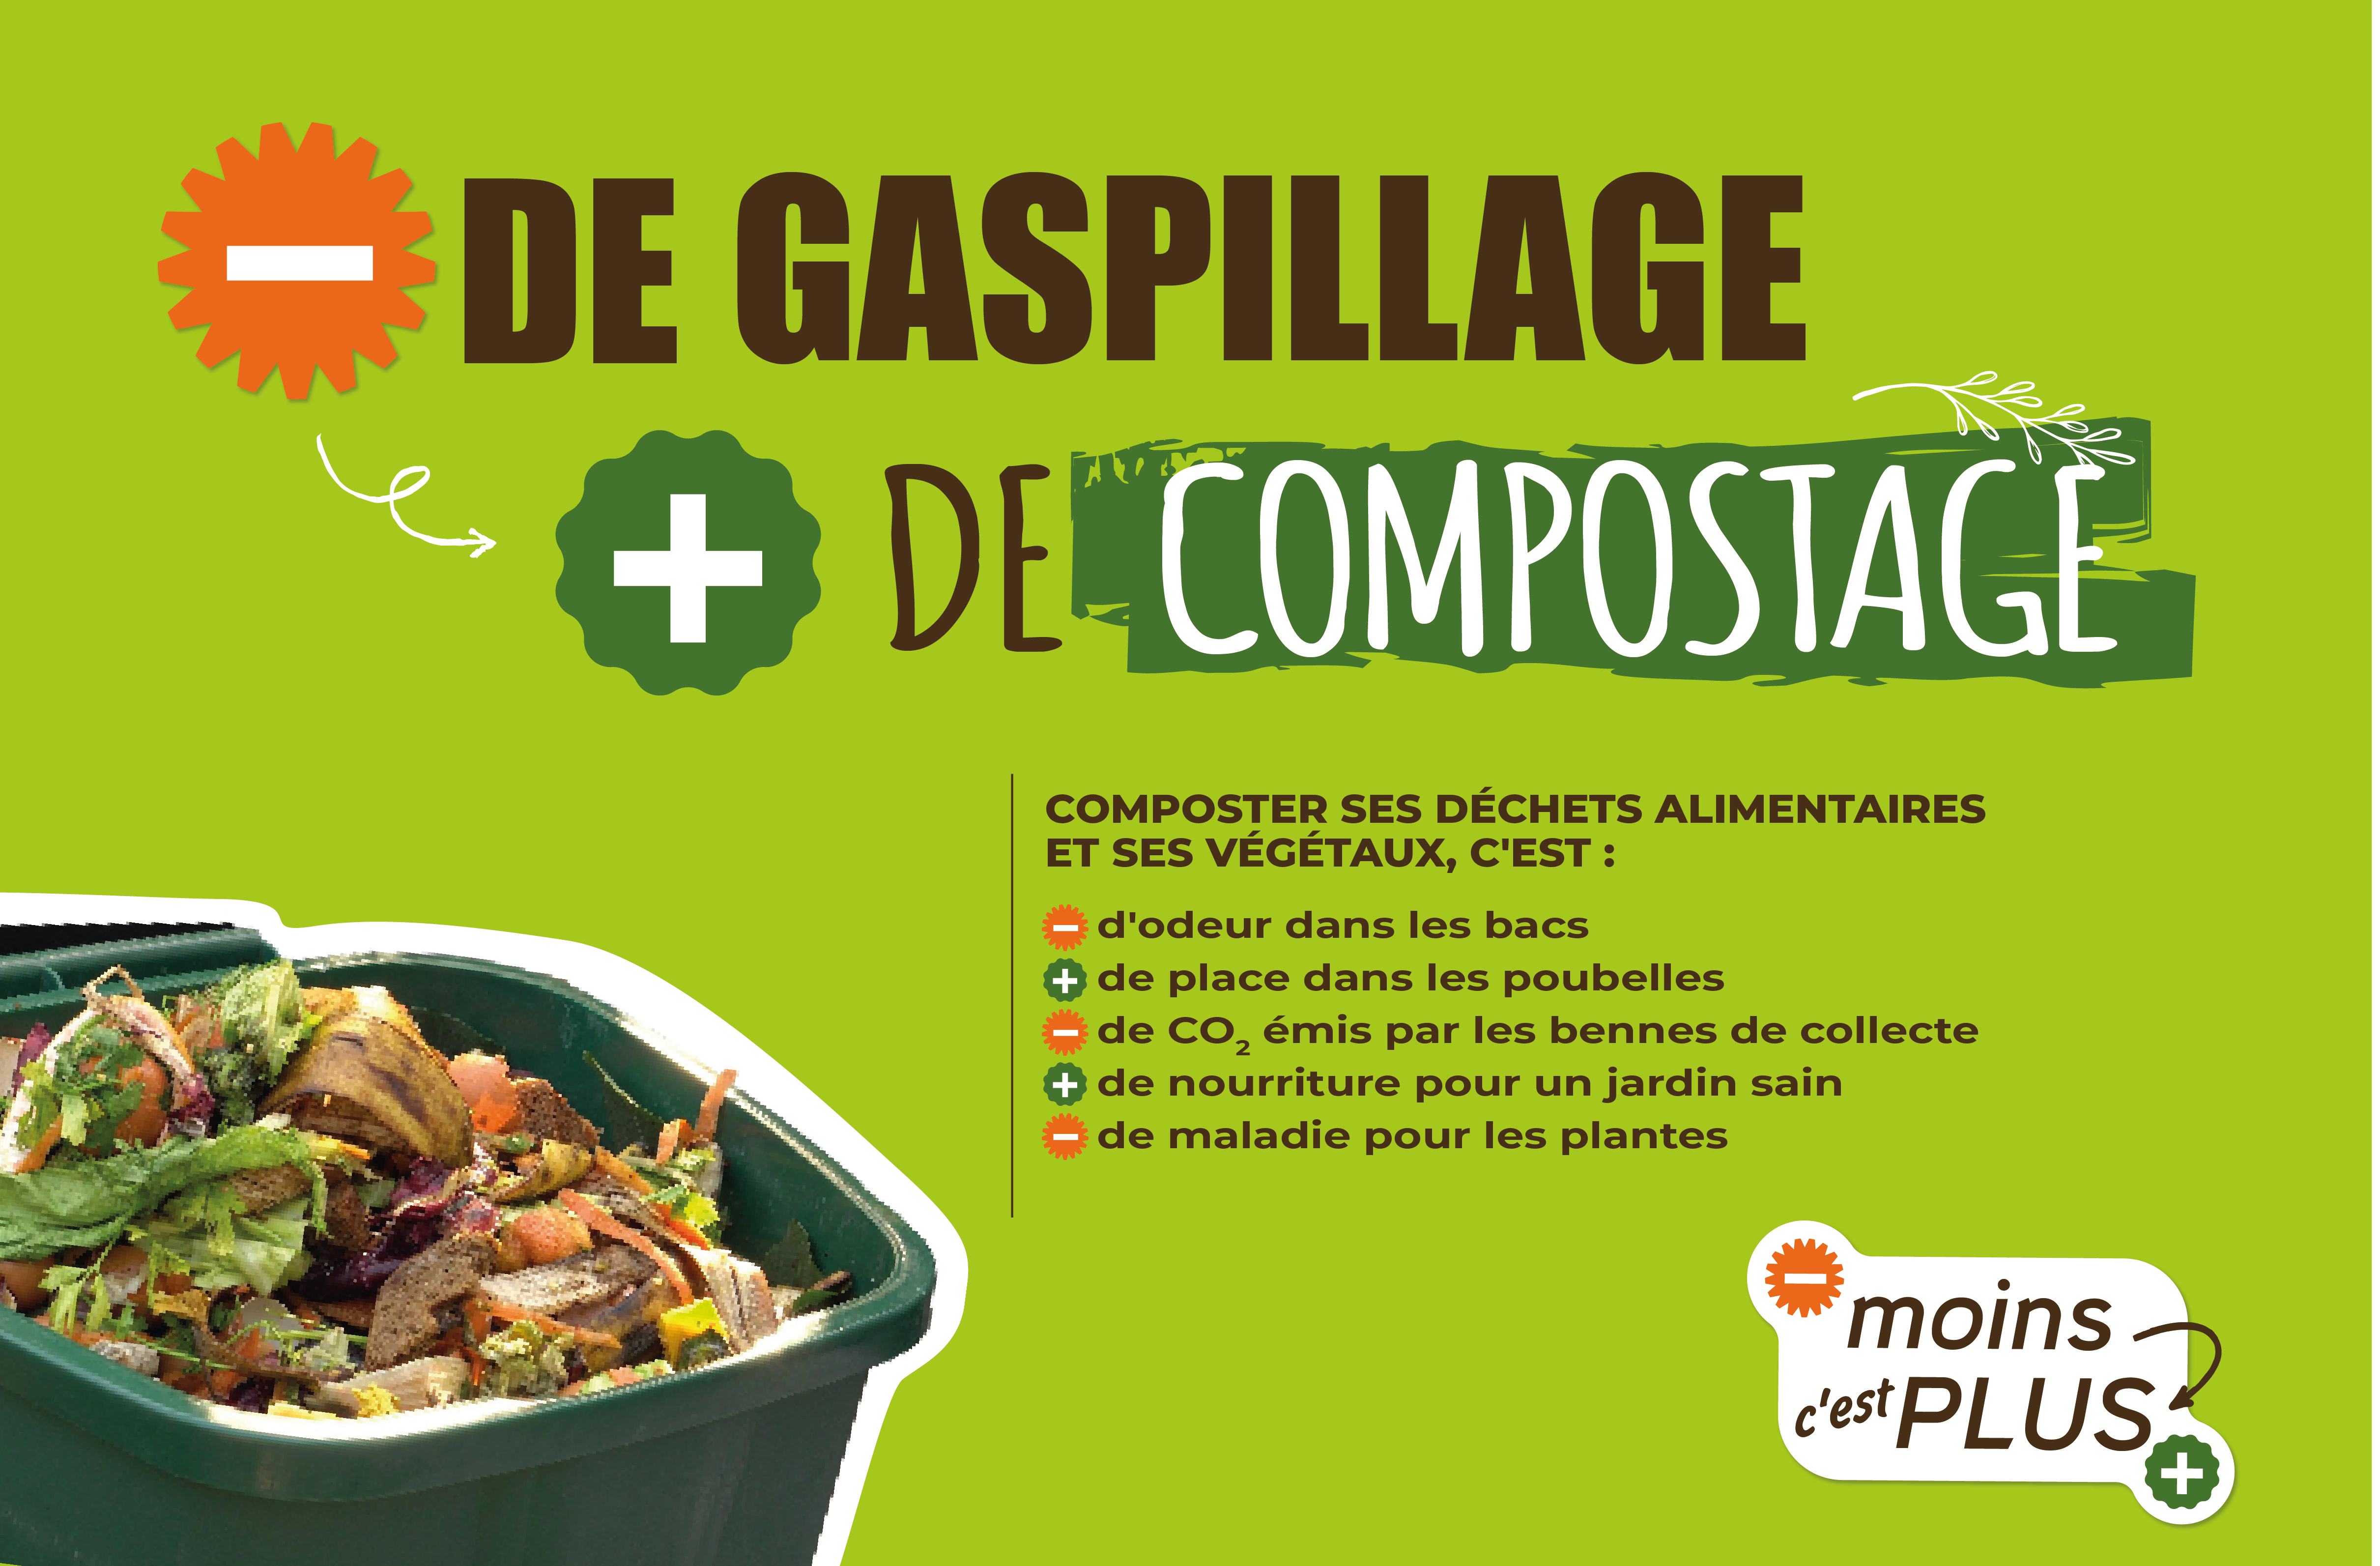 https://www.laval.fr/fileadmin/Phototheque_agglo/Dechets_-_doc___imgs/Campagne_d%C3%A9chets_2023/3._Vert_-_Compostage_visuel_site.png